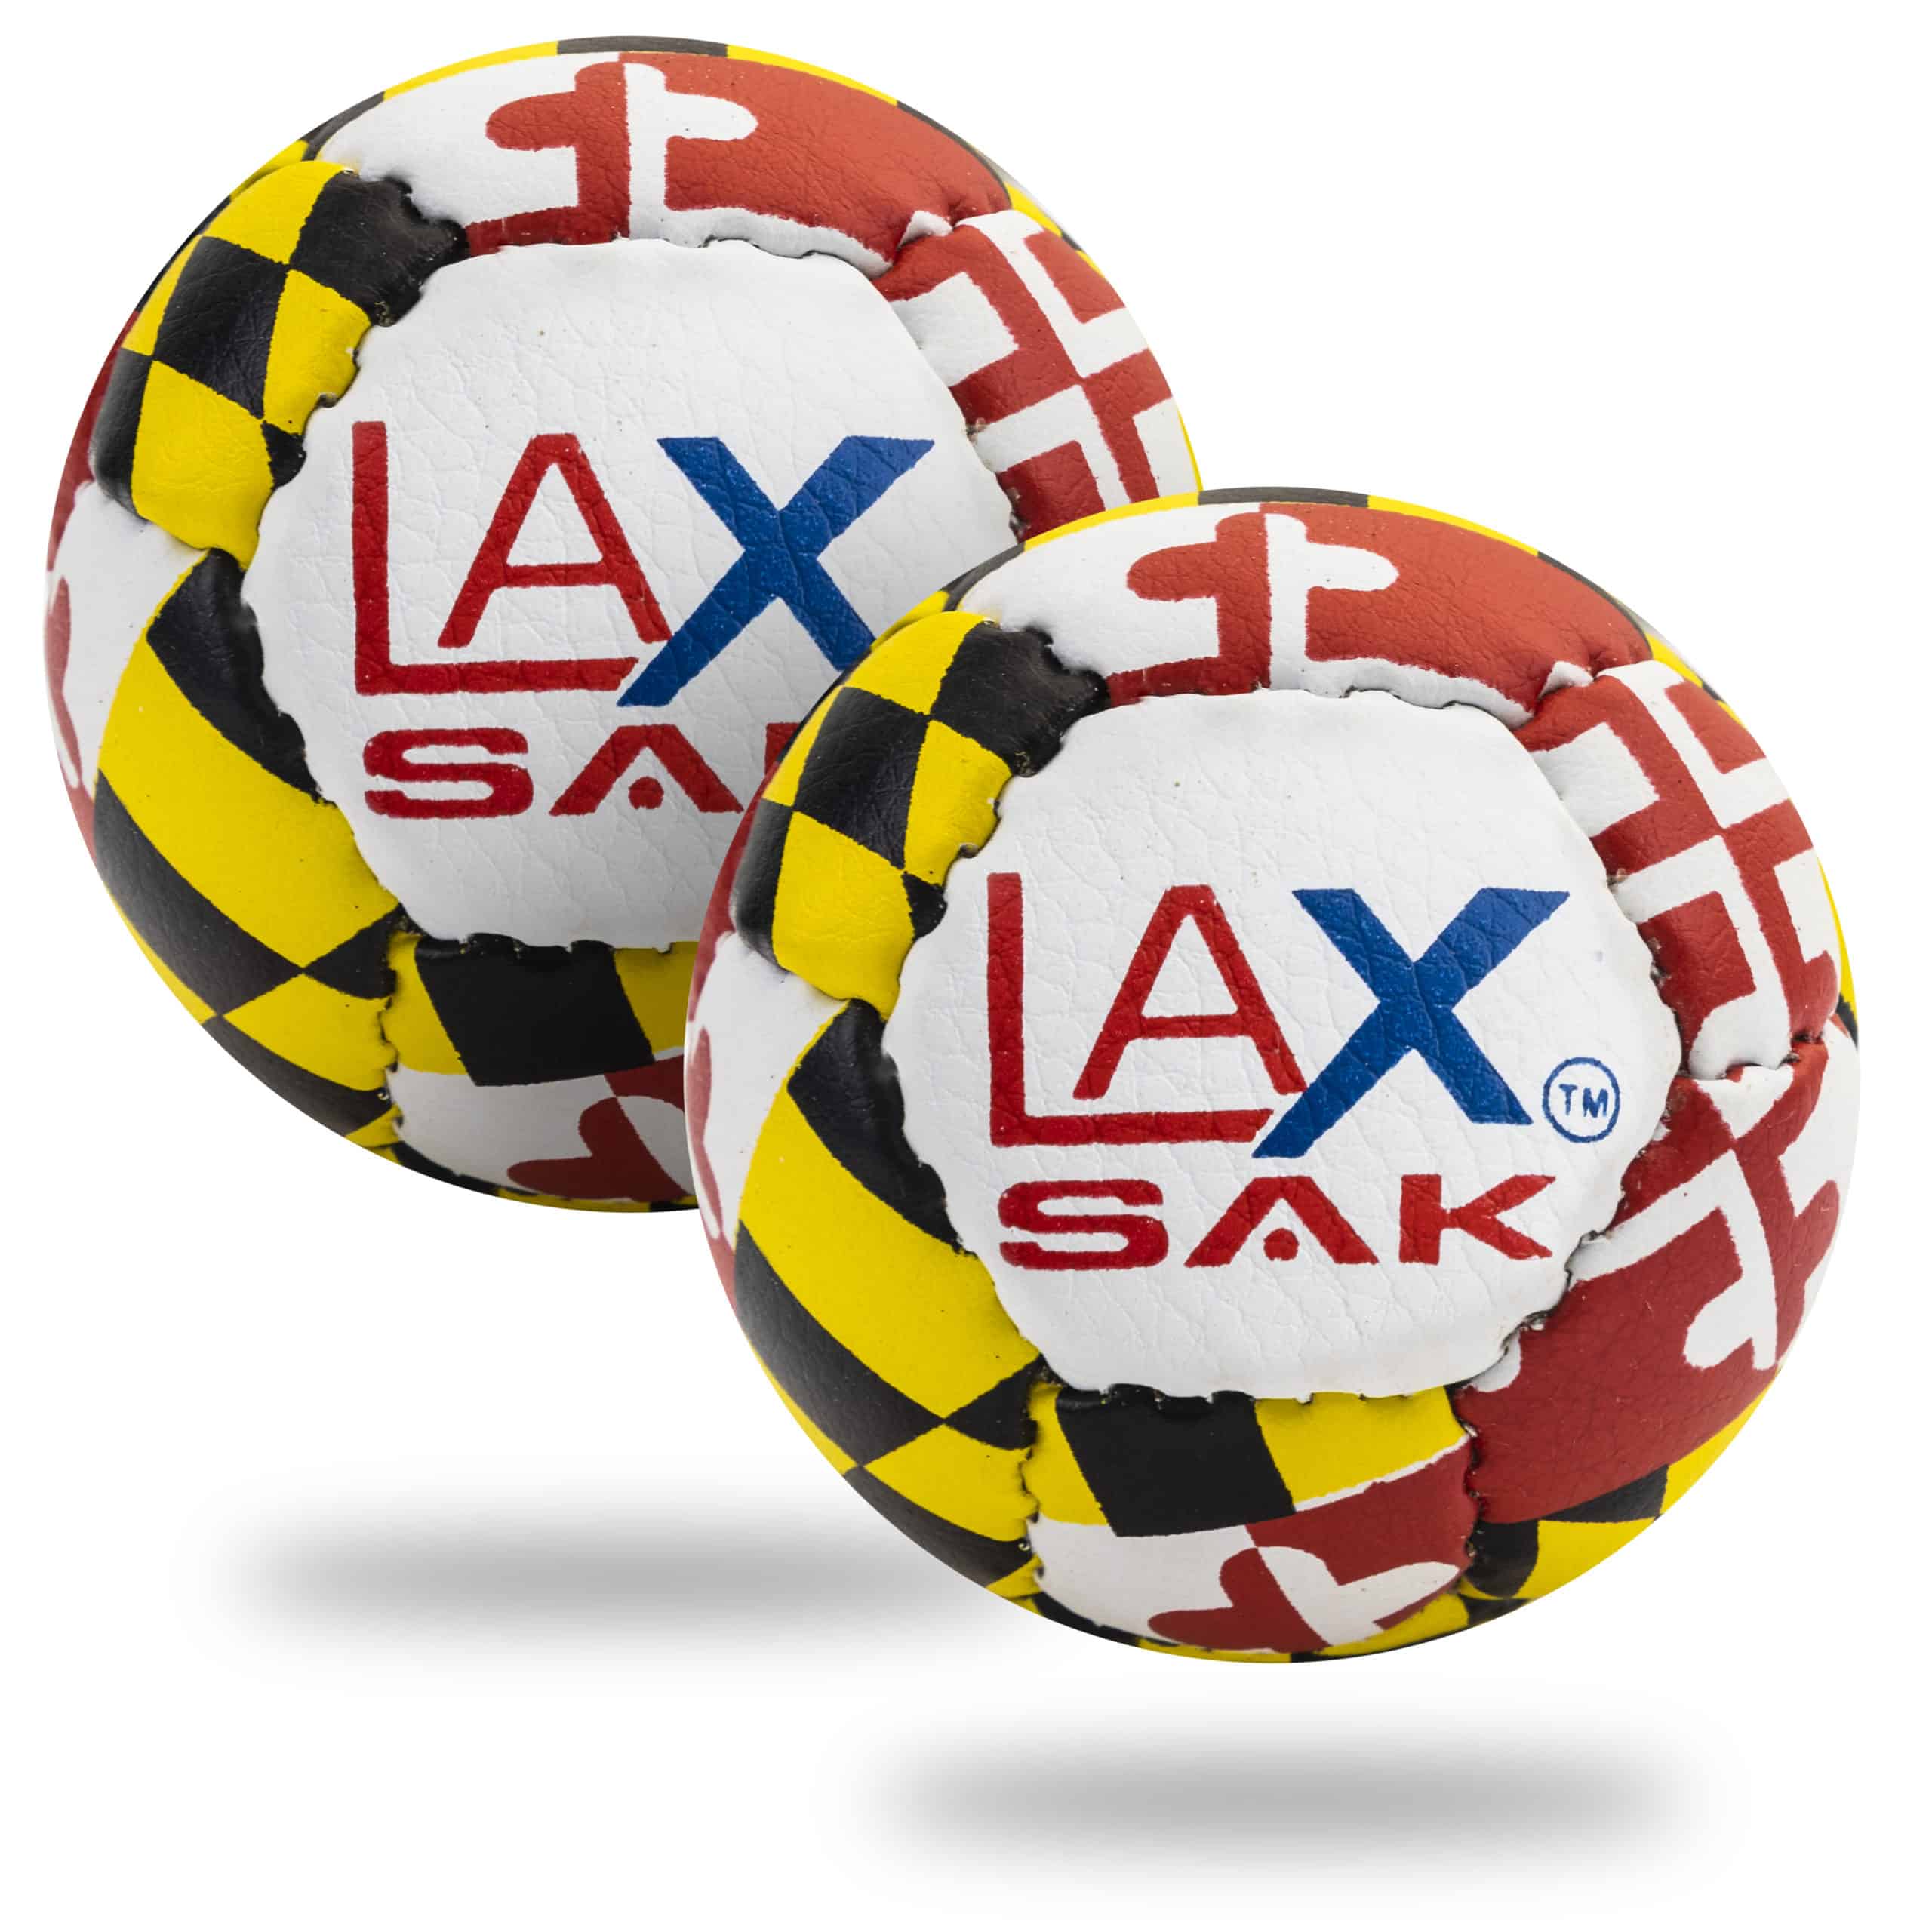 Lacrosse Sak Soft Practice Lacrosse Balls Great for Indoor & Outdoor Practices Same Weight & Size as a Regulation Lacrosse Balls Less Bounce & Minimal Rebounds 